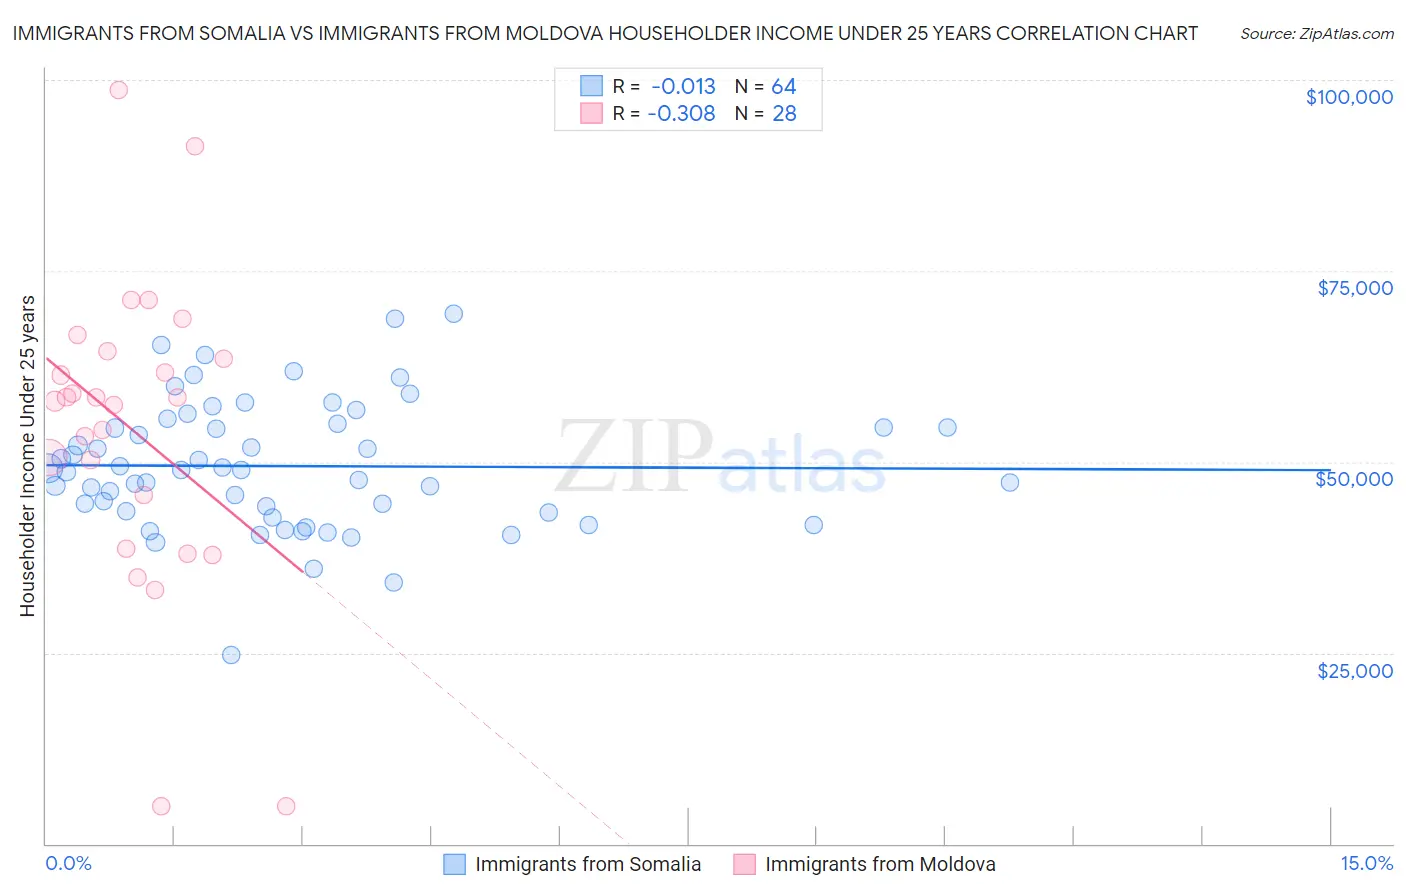 Immigrants from Somalia vs Immigrants from Moldova Householder Income Under 25 years